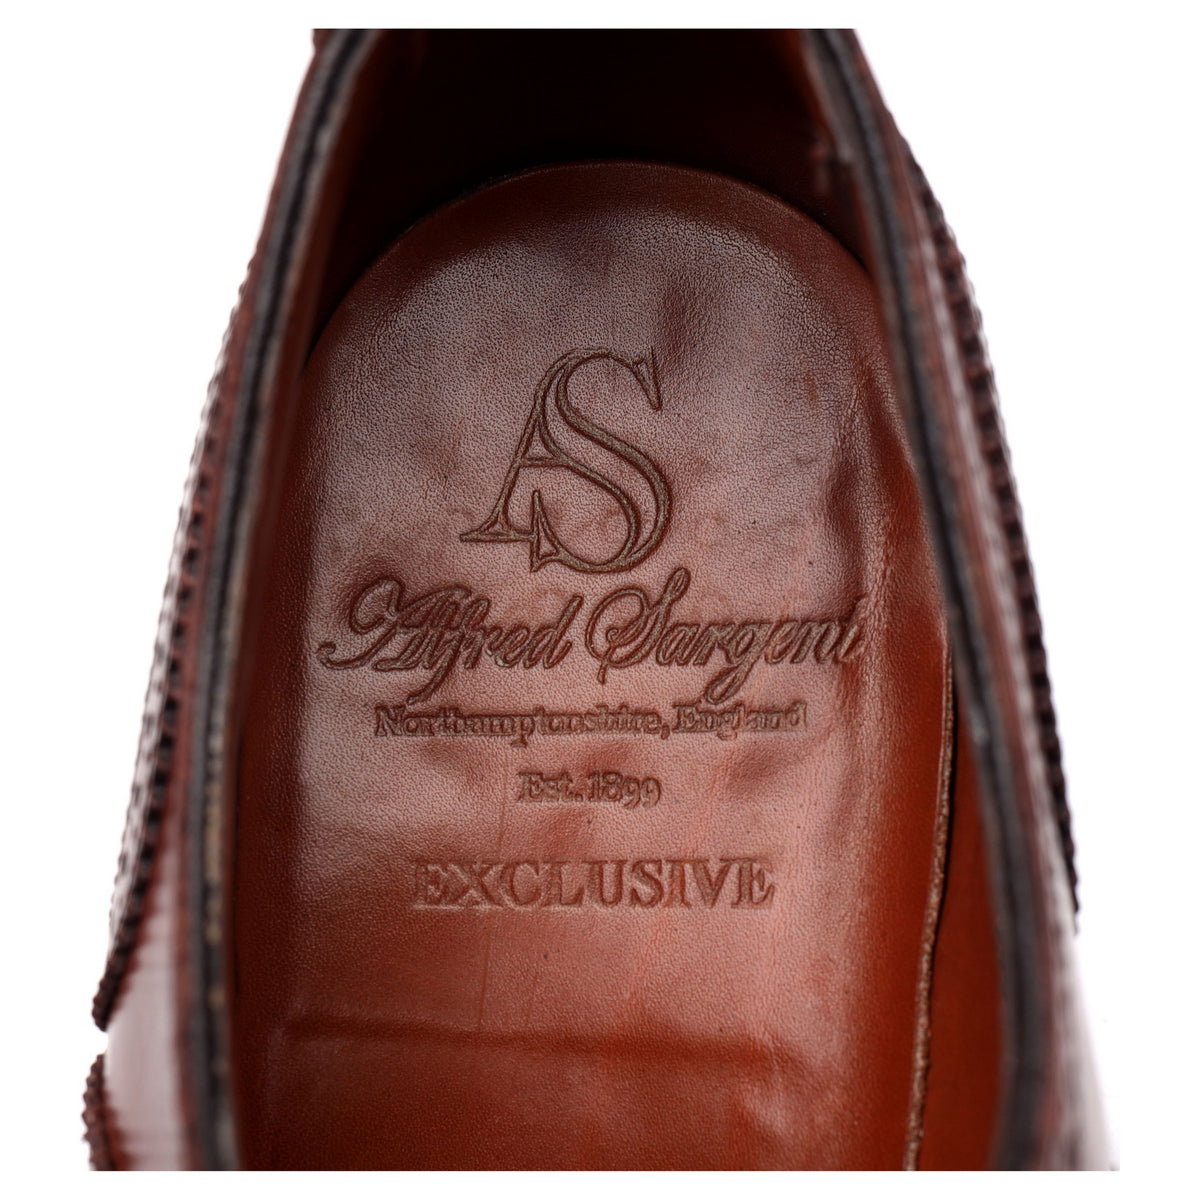 &#39;Hunt&#39; Brown Leather Oxford Brogues UK 9 F